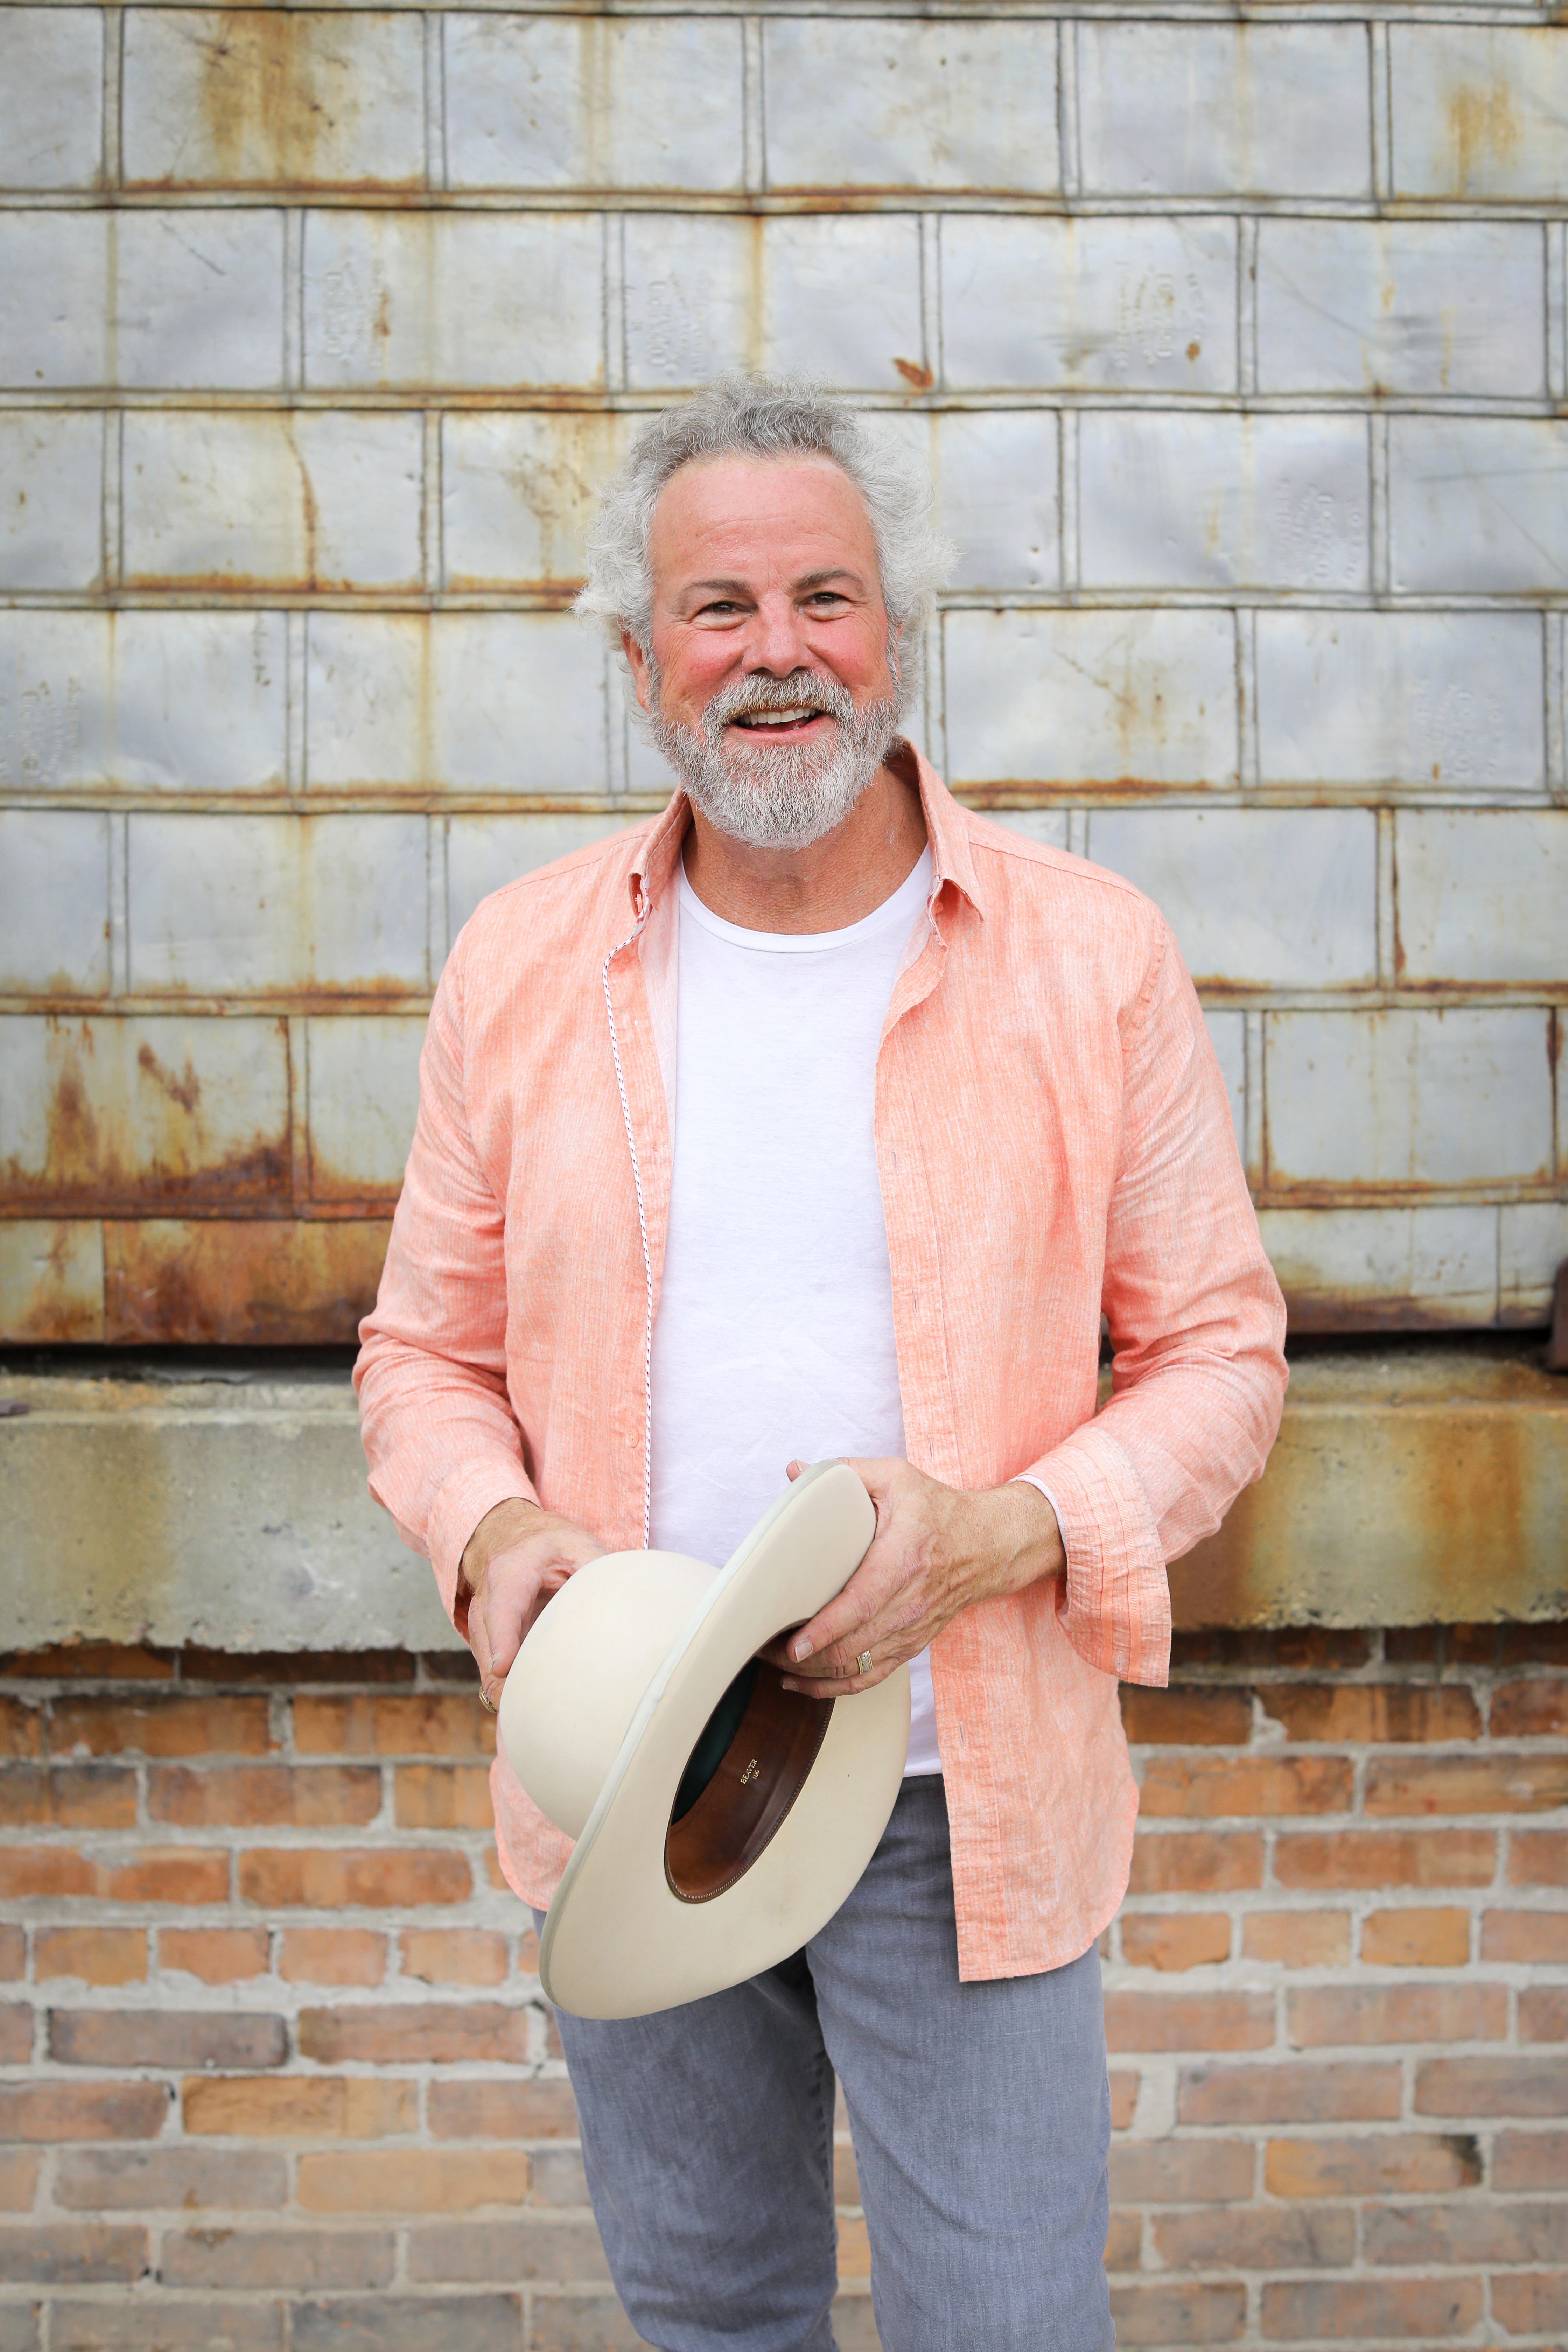 Wearing a peach-colored shirt and holding a hat, Robert Earl Keen smiles for the camera